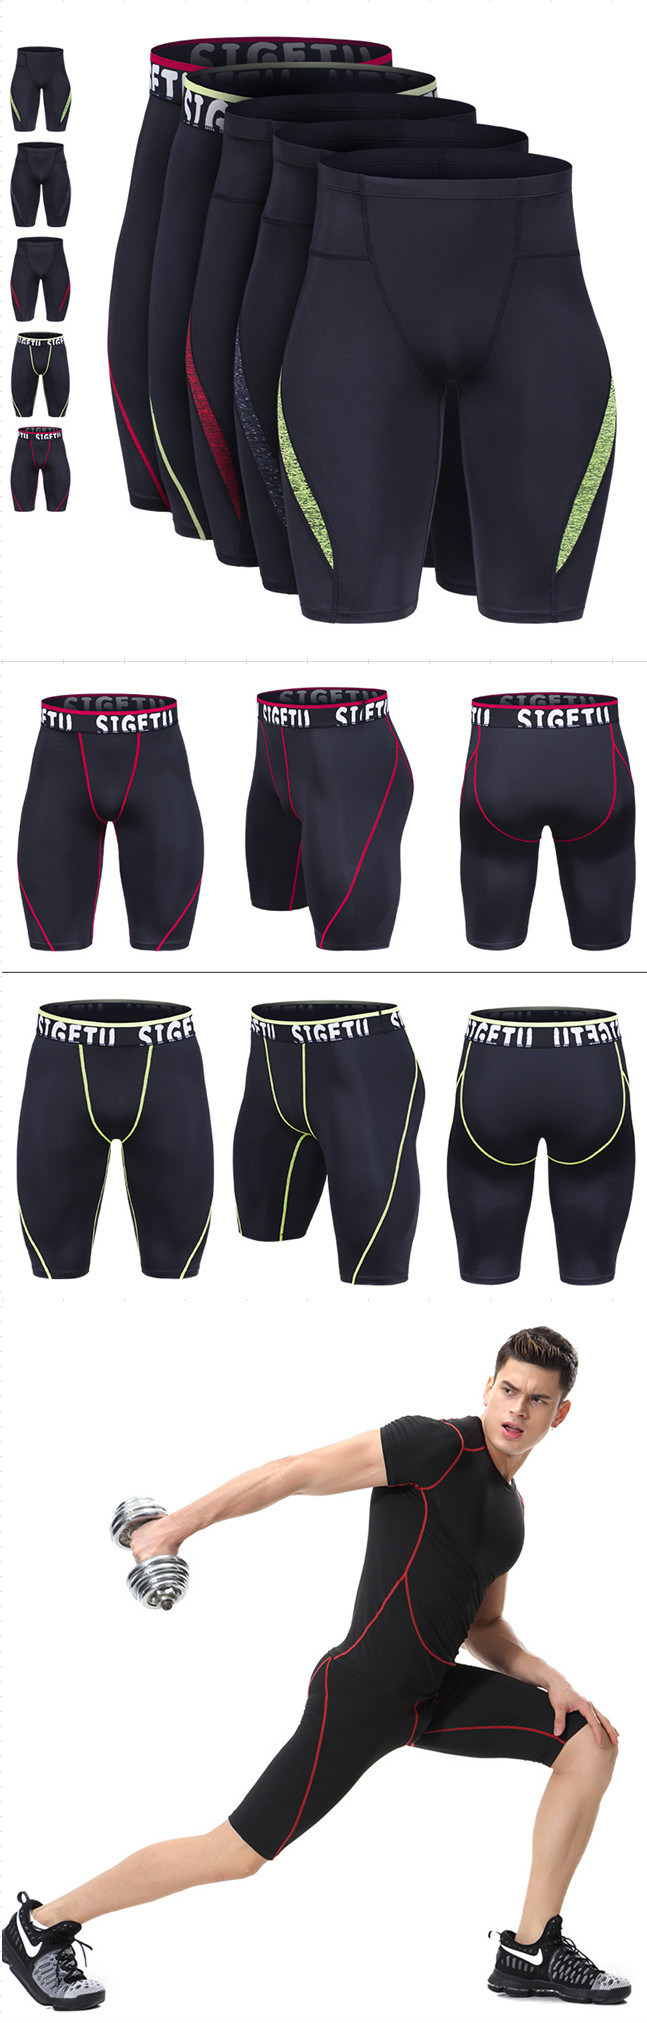 Asia Good Quality Gym Fitness Quick Dry Legging Sports Shorts